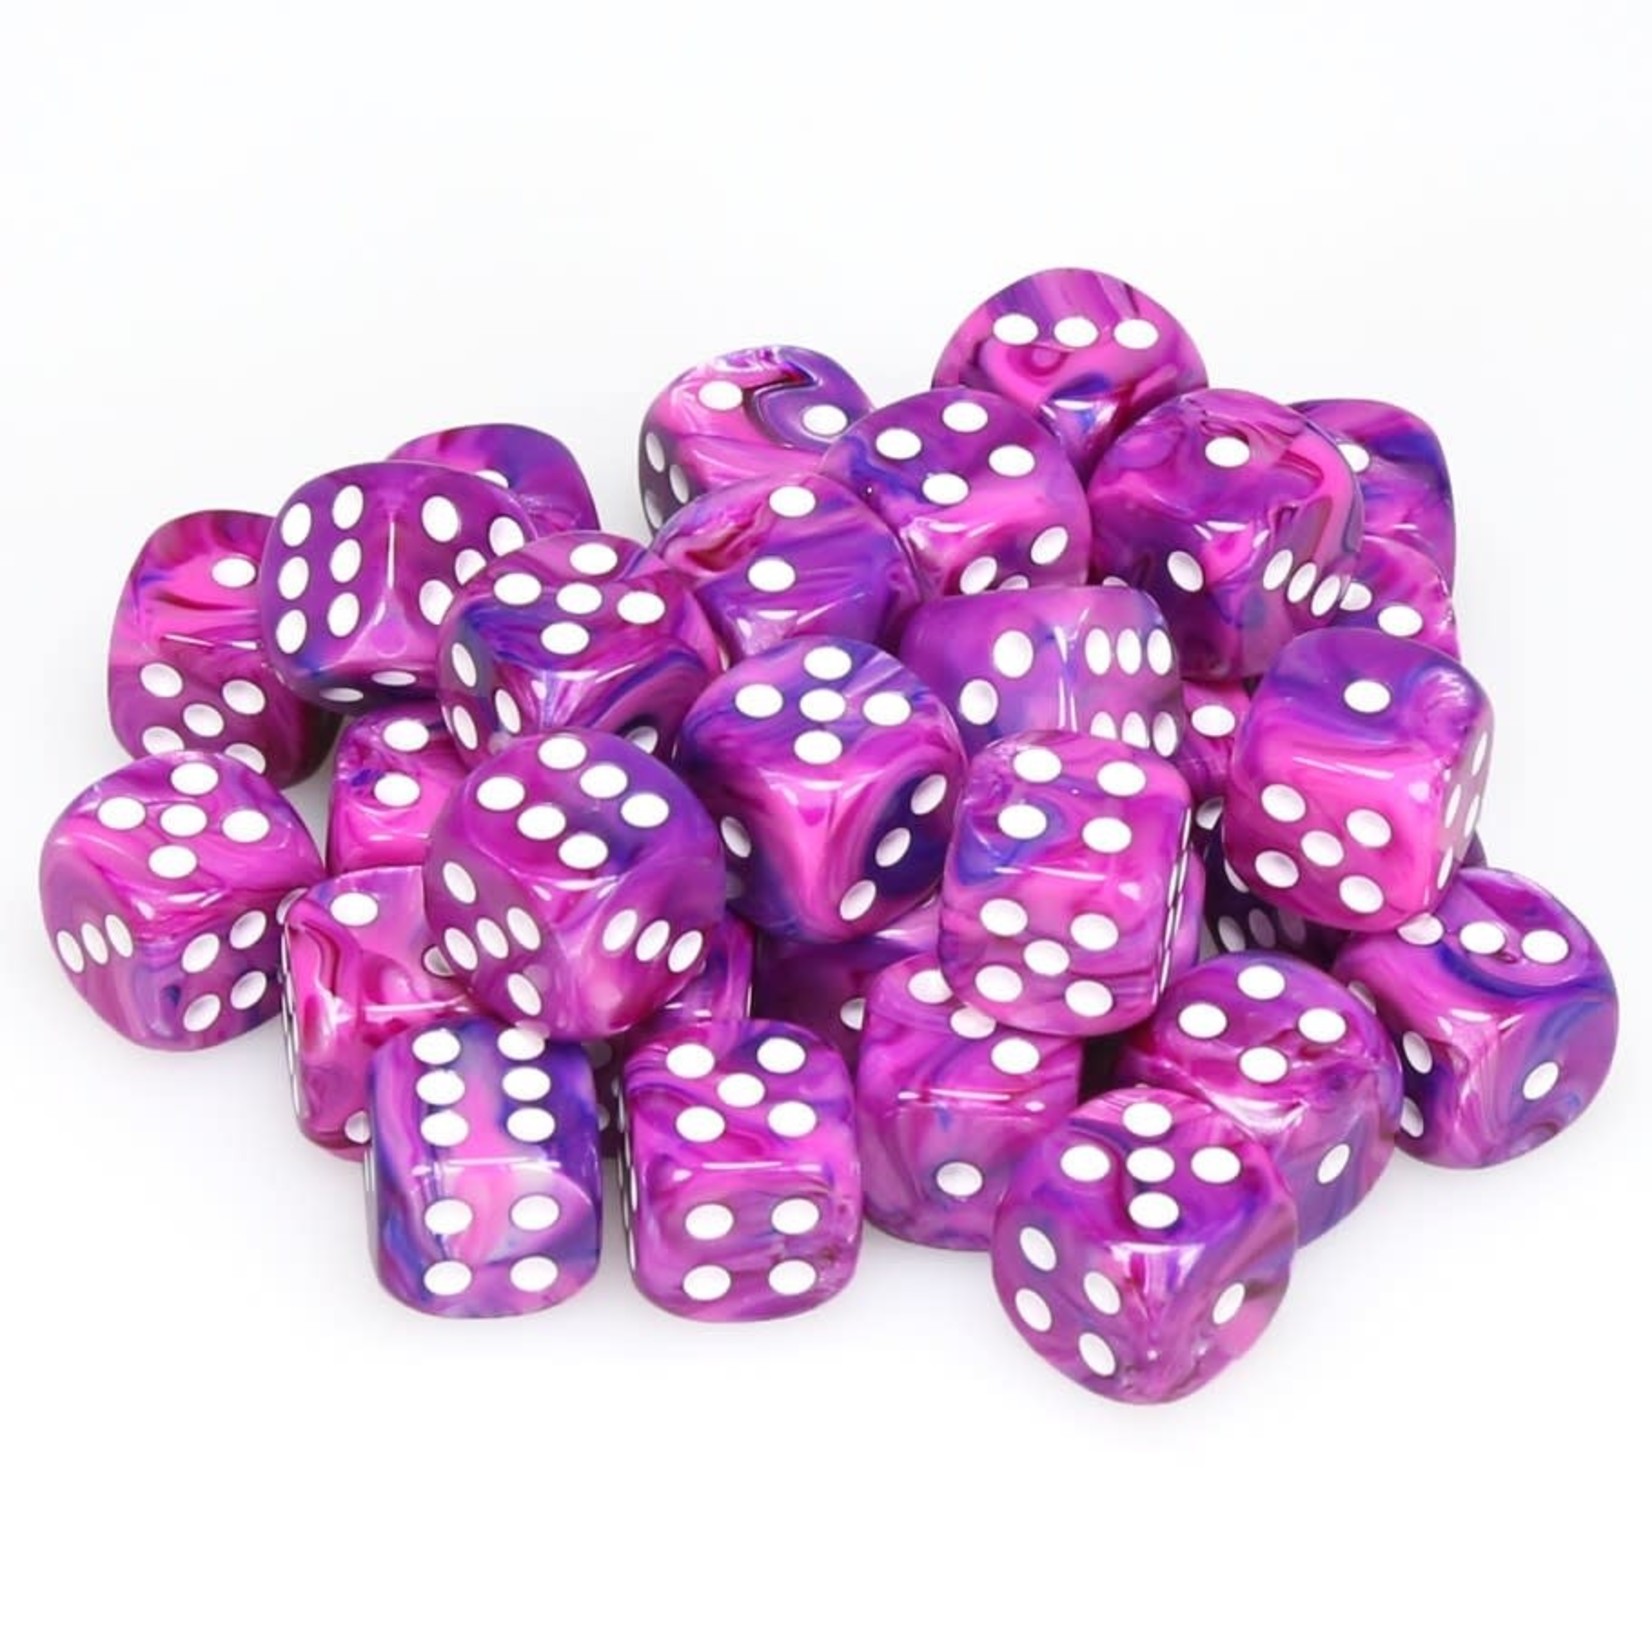 Chessex Chessex Festive Violet with White 12 mm d6 36 die set